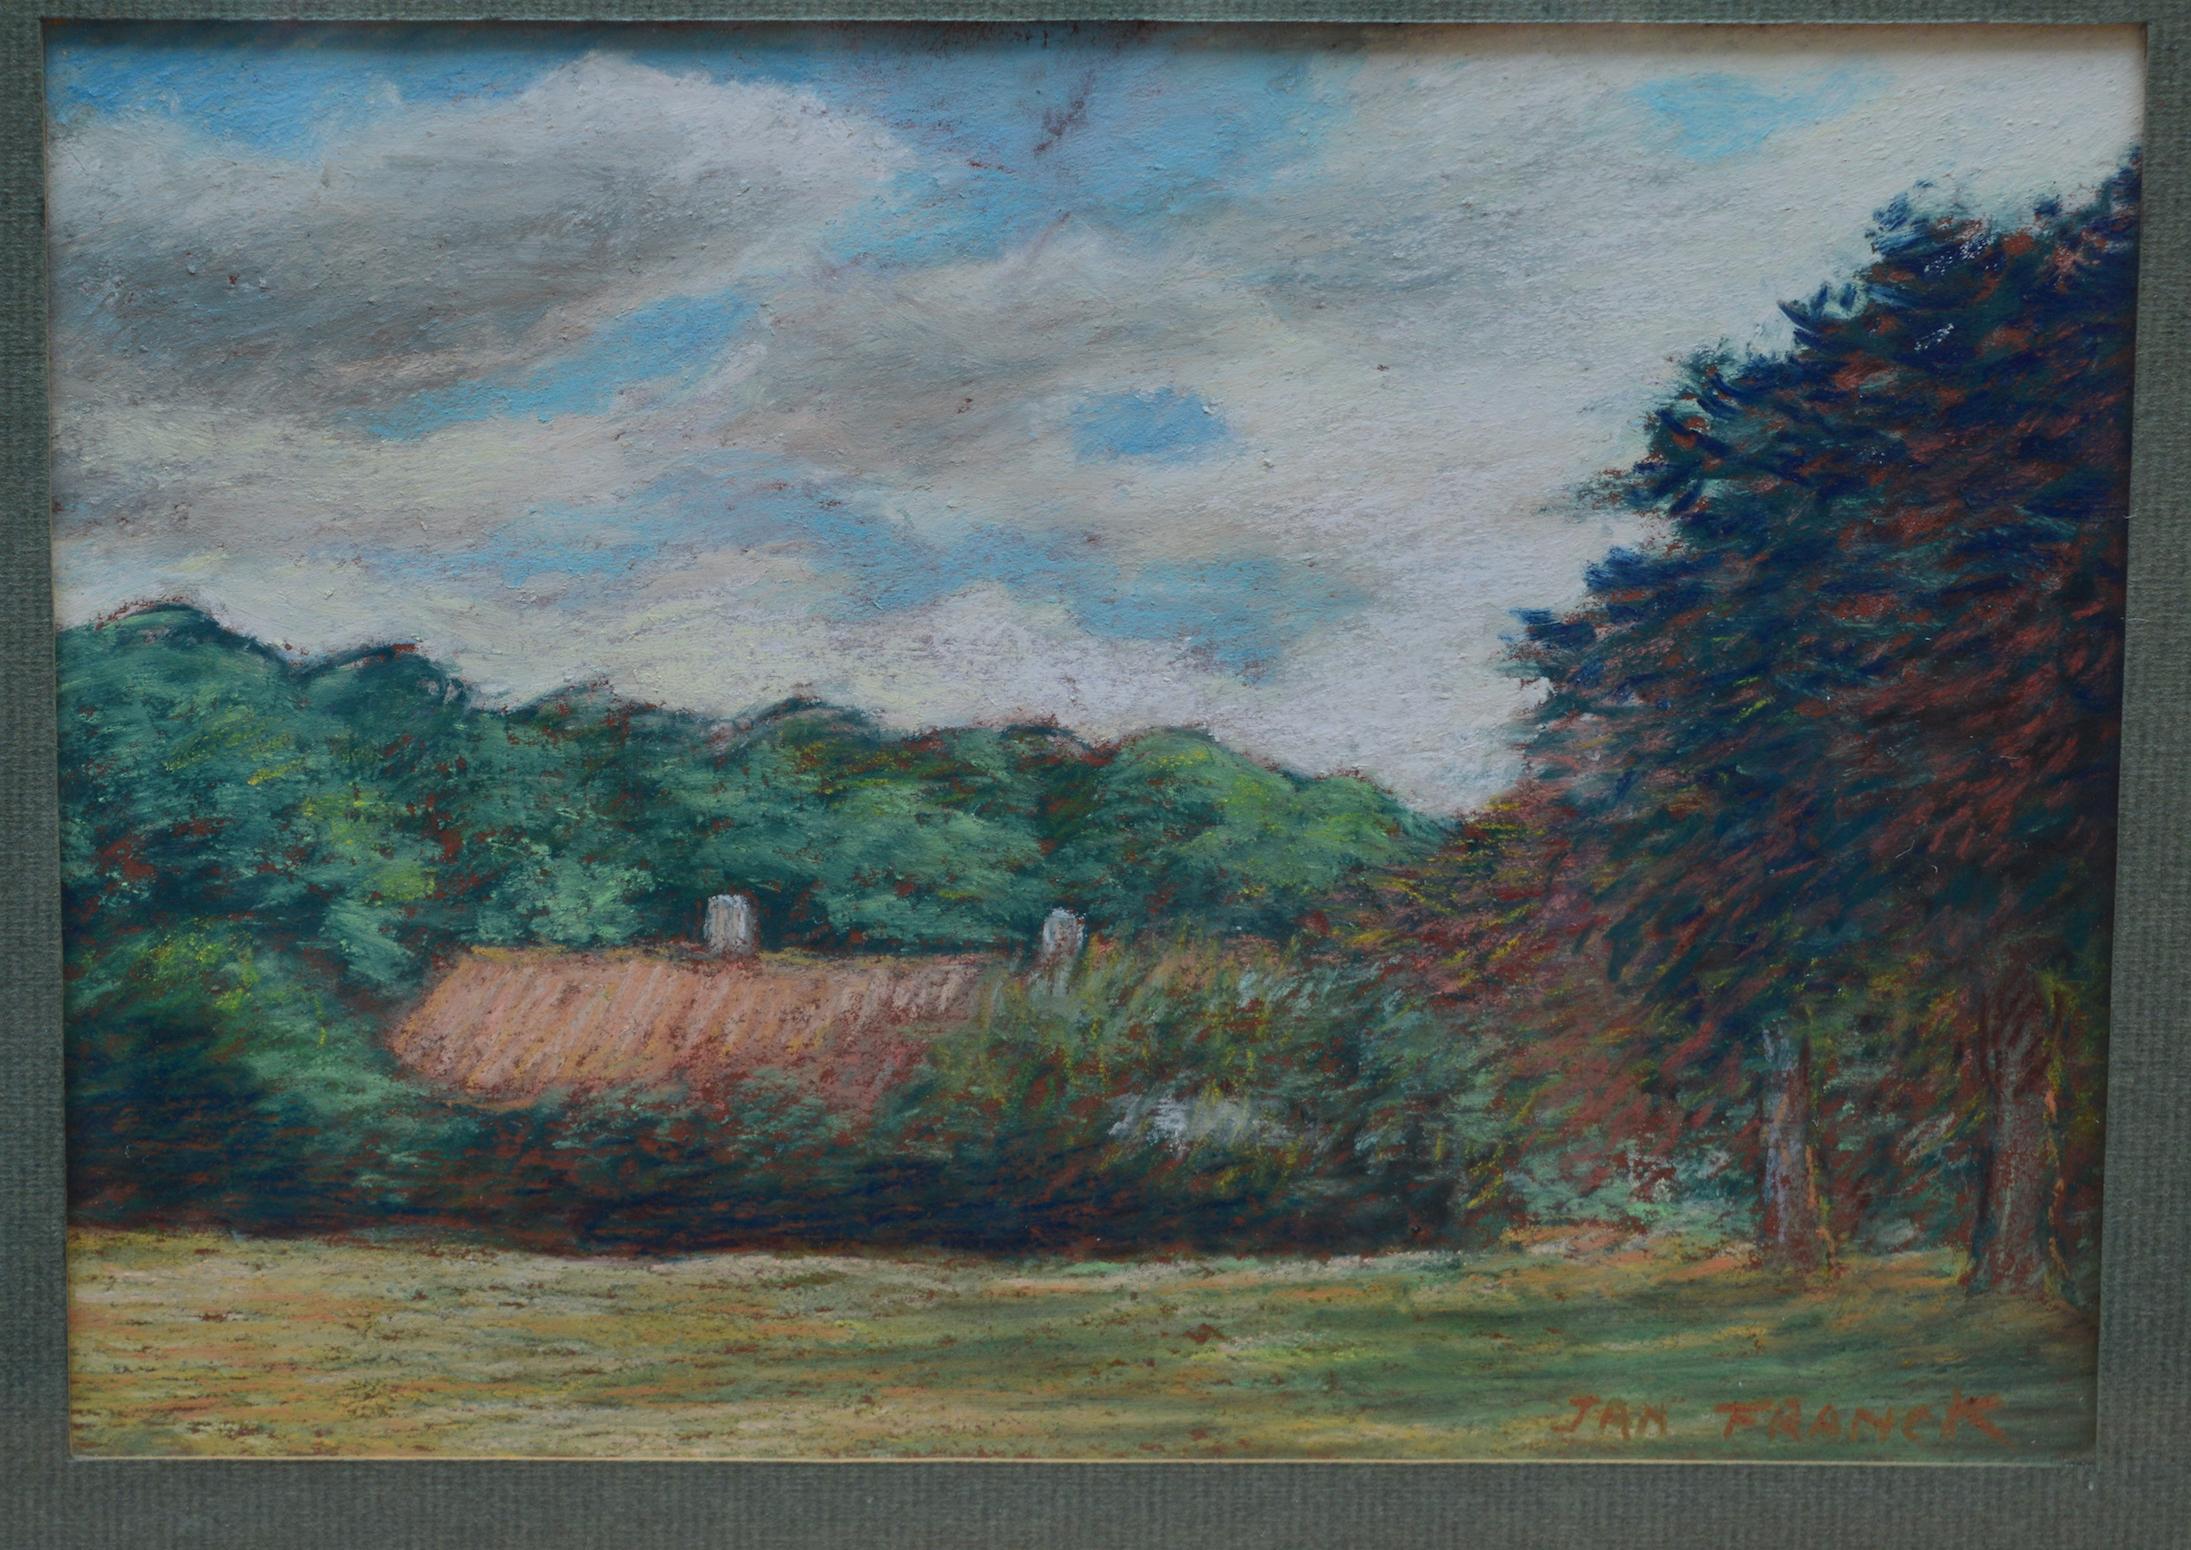 Impressionists style Belgian cottage landscape drawing in chalk by the known Belgian artist Jan Franck (b1929 -d2010)Born in Brugges in 1929 ,Franck studied at the Academie of fine Art under Willem Van Aerden. Franck is not only known for his chalk